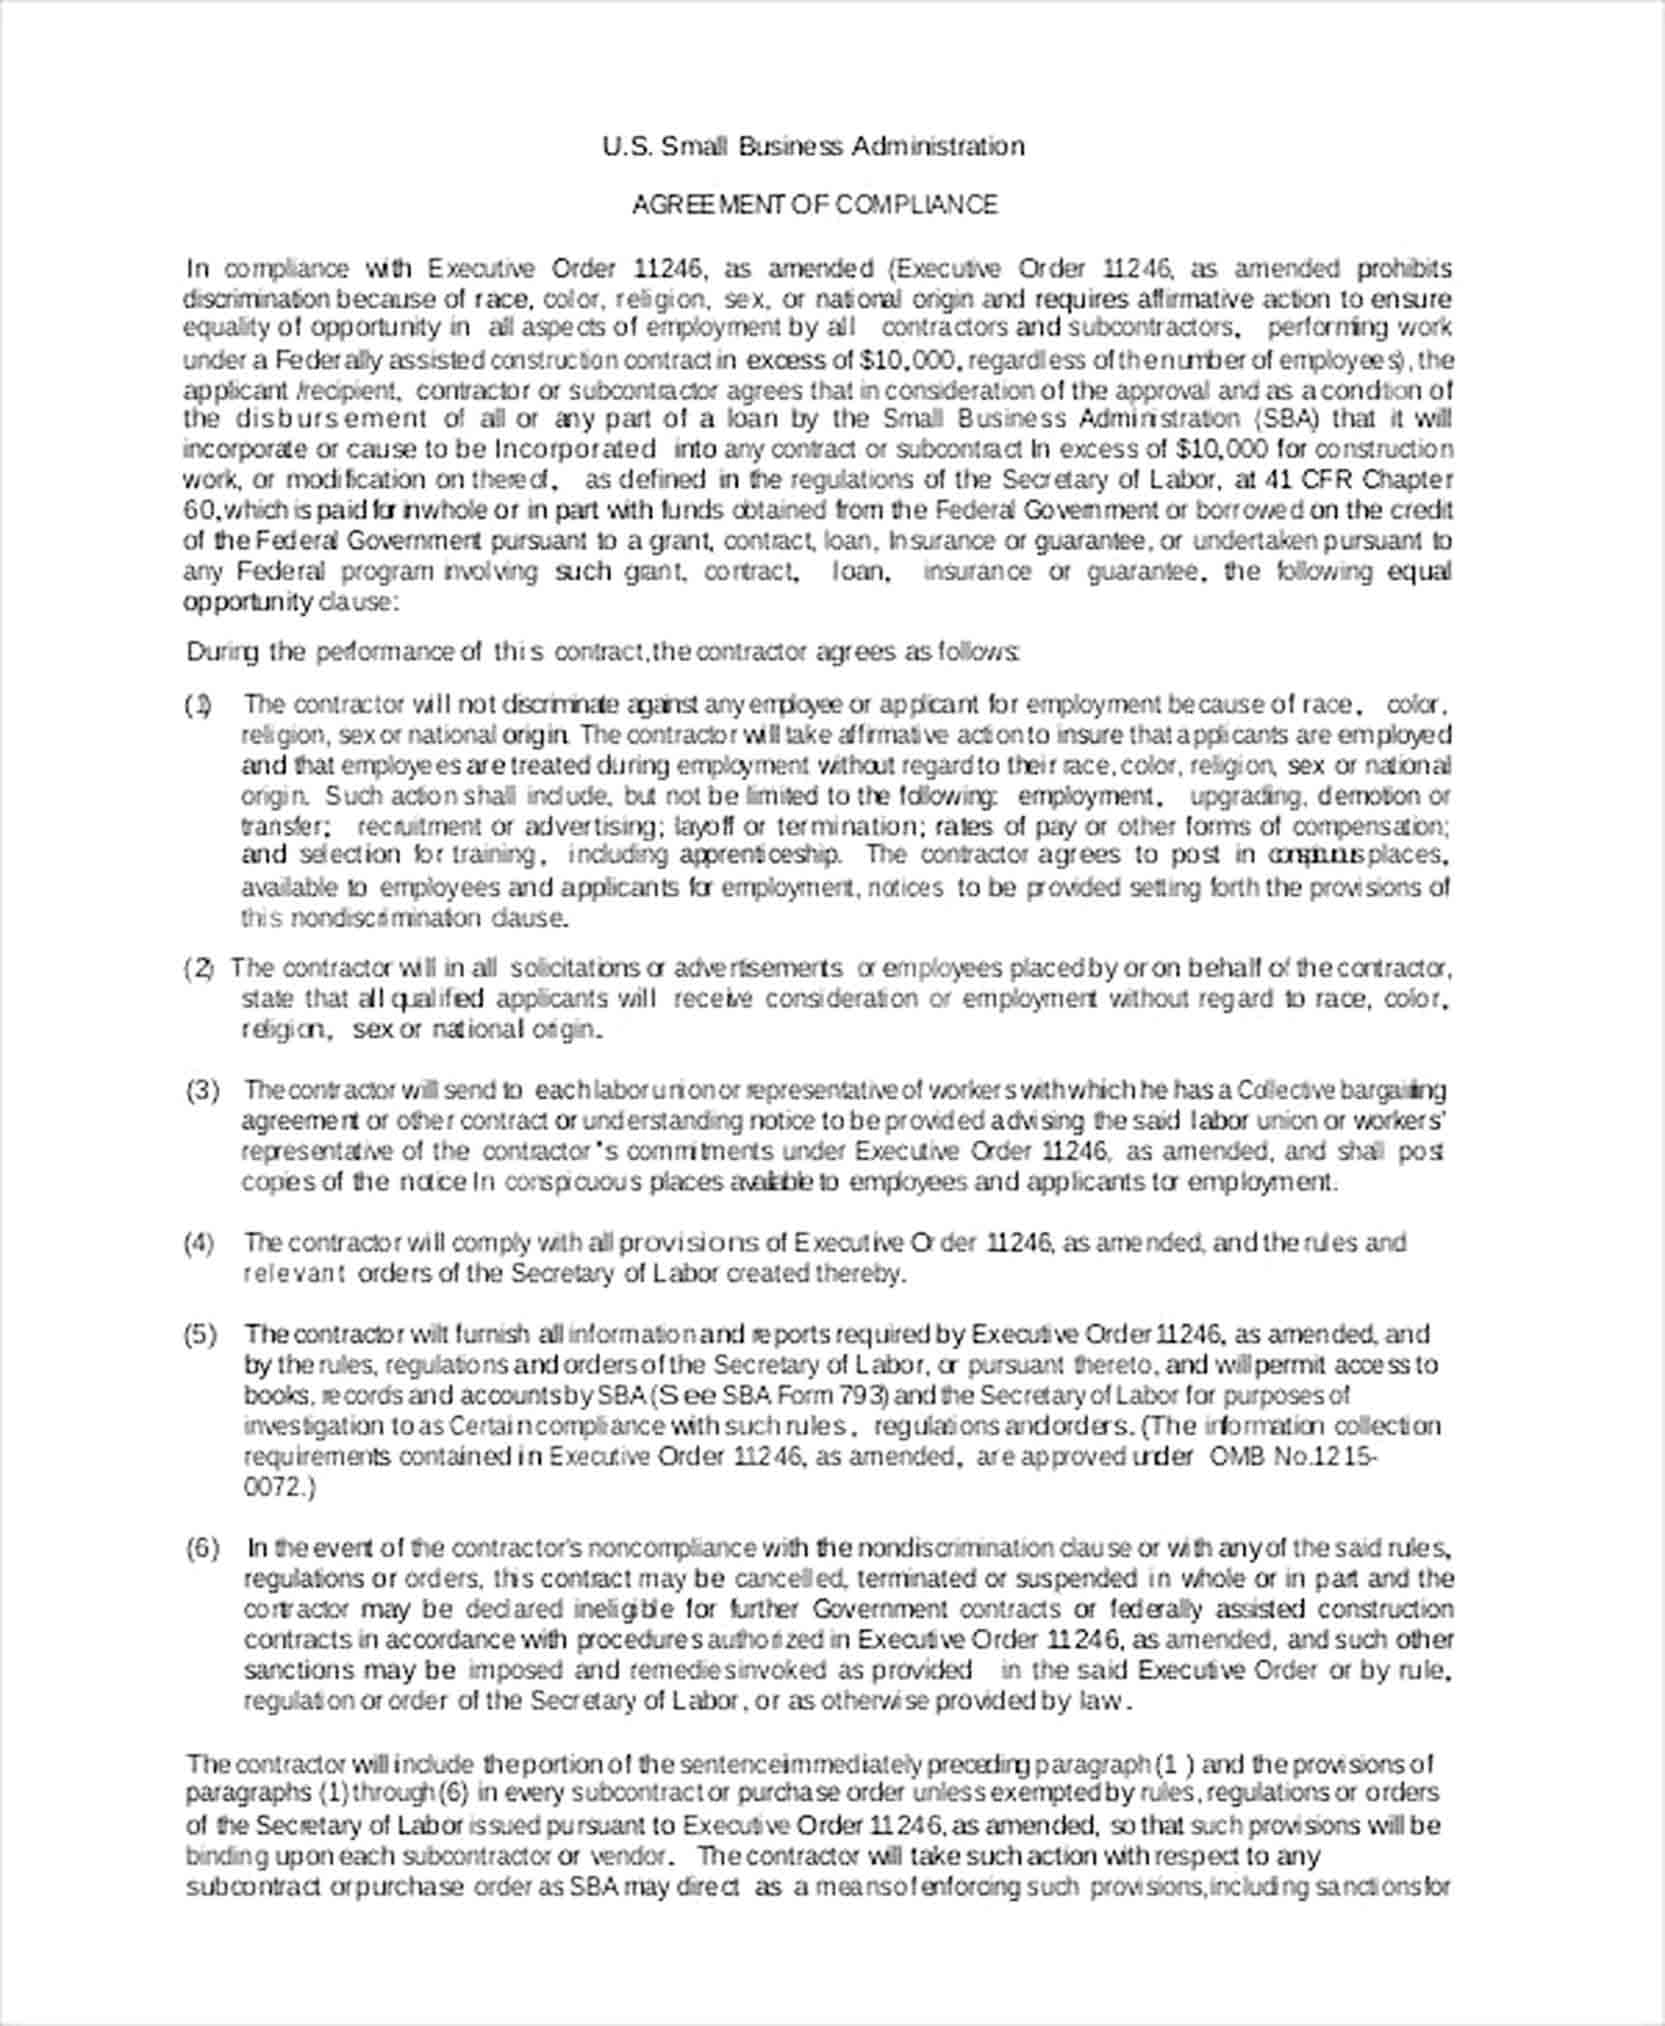 Sample Business Administration Agreement of Compliance